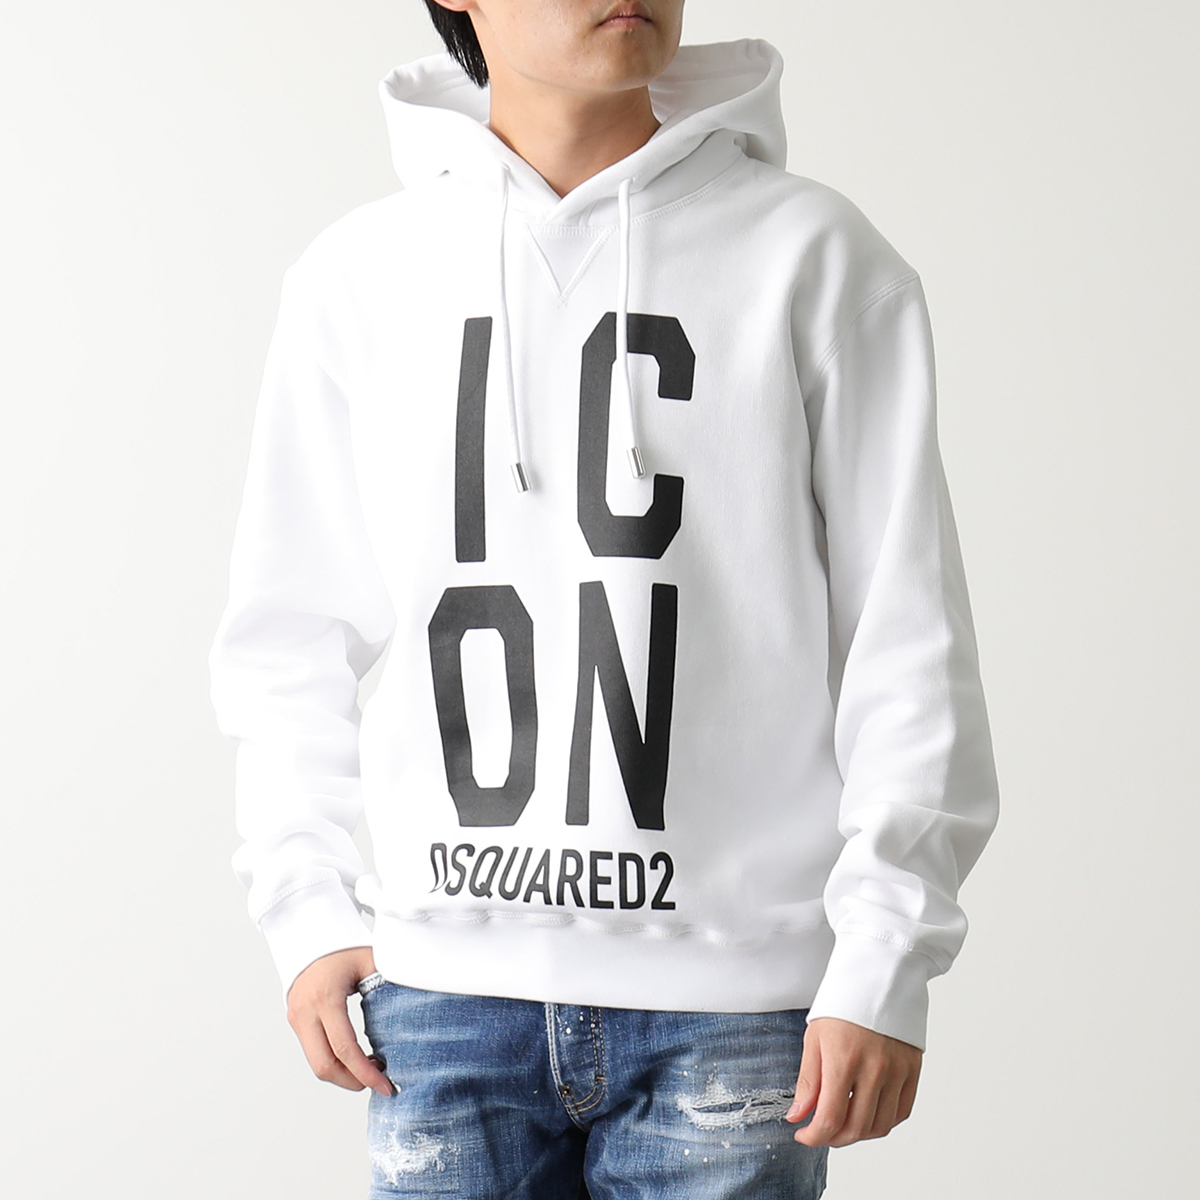 DSQUARED2 ディースクエアード パーカー ICON SQUARED COOL HOODIE S79GU0108 S25516 メンズ ロゴ プルオーバー スウェット カラー2色｜s-musee｜03